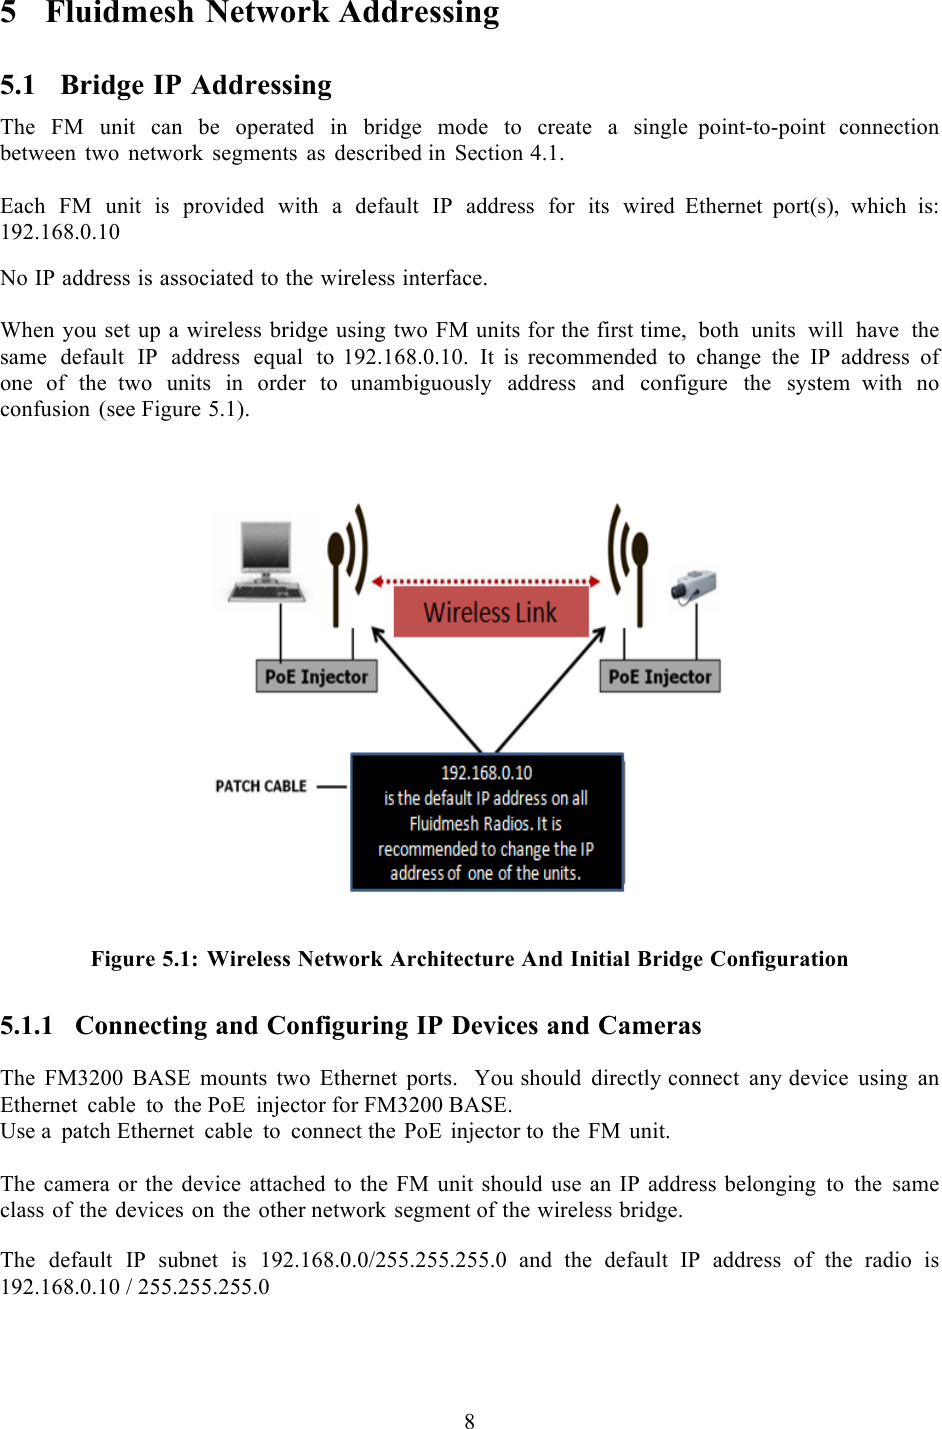  8  5 Fluidmesh Network Addressing 5.1 Bridge IP Addressing The FM unit can be operated in bridge mode to create  a  single point-to-point connection between two network segments as described in Section 4.1.  Each FM unit is provided with a default IP address for its wired  Ethernet  port(s), which is:  192.168.0.10  No IP address is associated to the wireless interface.  When you set up a wireless bridge using two FM units for the first time, both units will have the same default IP address equal to 192.168.0.10. It is recommended to change the IP address of one of the  two units in order to unambiguously address and configure the system  with no confusion (see Figure 5.1).     Figure 5.1: Wireless Network Architecture And Initial Bridge Configuration 5.1.1 Connecting and Configuring IP Devices and Cameras  The FM3200 BASE mounts  two Ethernet ports.   You should directly connect any device using an Ethernet cable to the PoE injector for FM3200 BASE. Use a patch Ethernet cable to connect the PoE injector to the FM unit.  The camera or the device attached to the FM unit should use an IP address belonging to the same class of the devices on the other network segment of the wireless bridge.  The default IP subnet is 192.168.0.0/255.255.255.0 and  the  default  IP  address  of  the  radio  is 192.168.0.10 / 255.255.255.0 